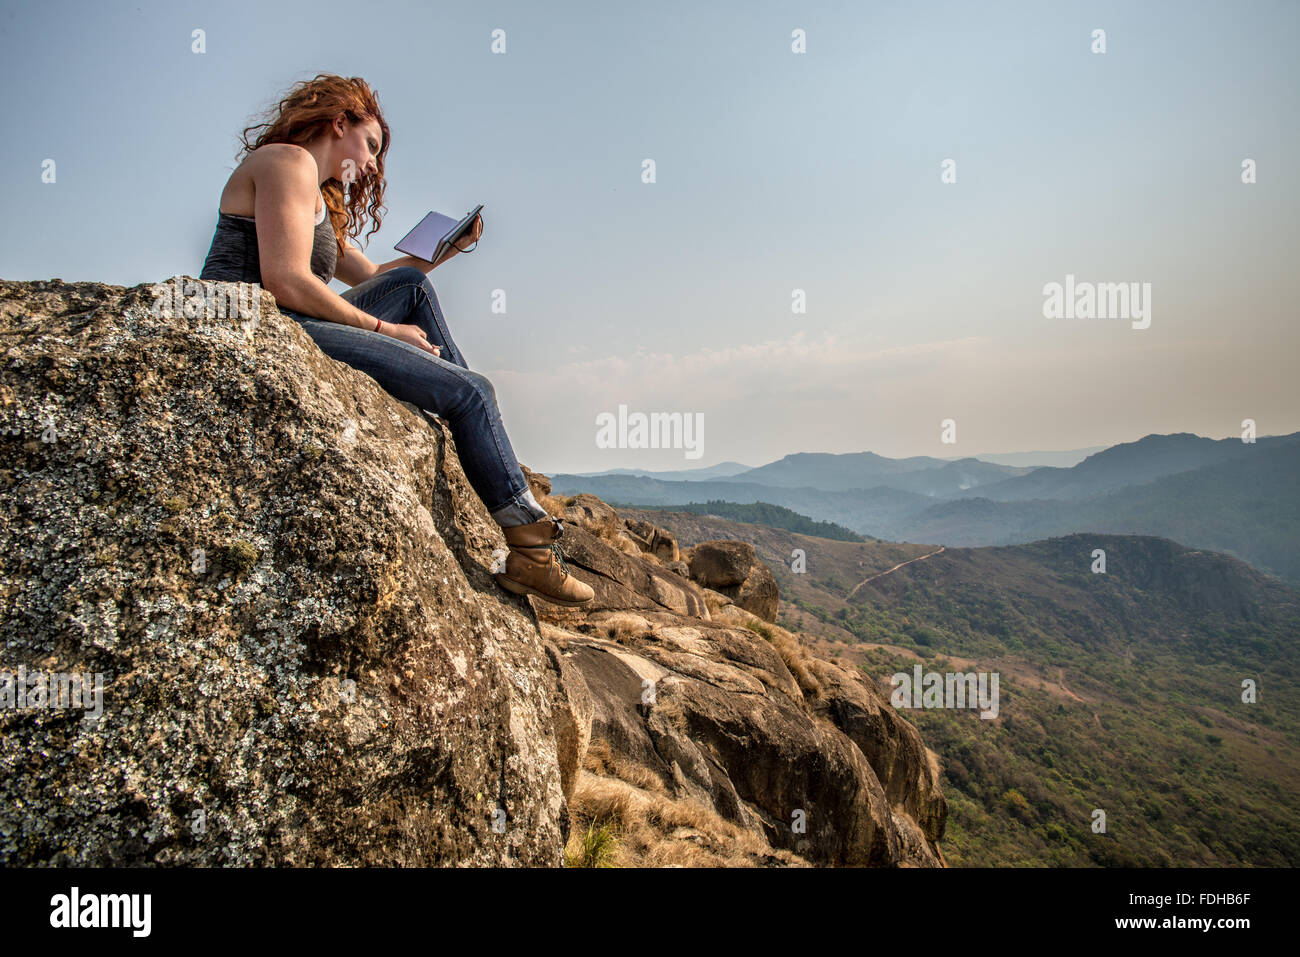 Red-headed girl writing in a journal on top of a boulder at Mlilwane Wildlife Sanctuary in Swaziland, Africa. Stock Photo